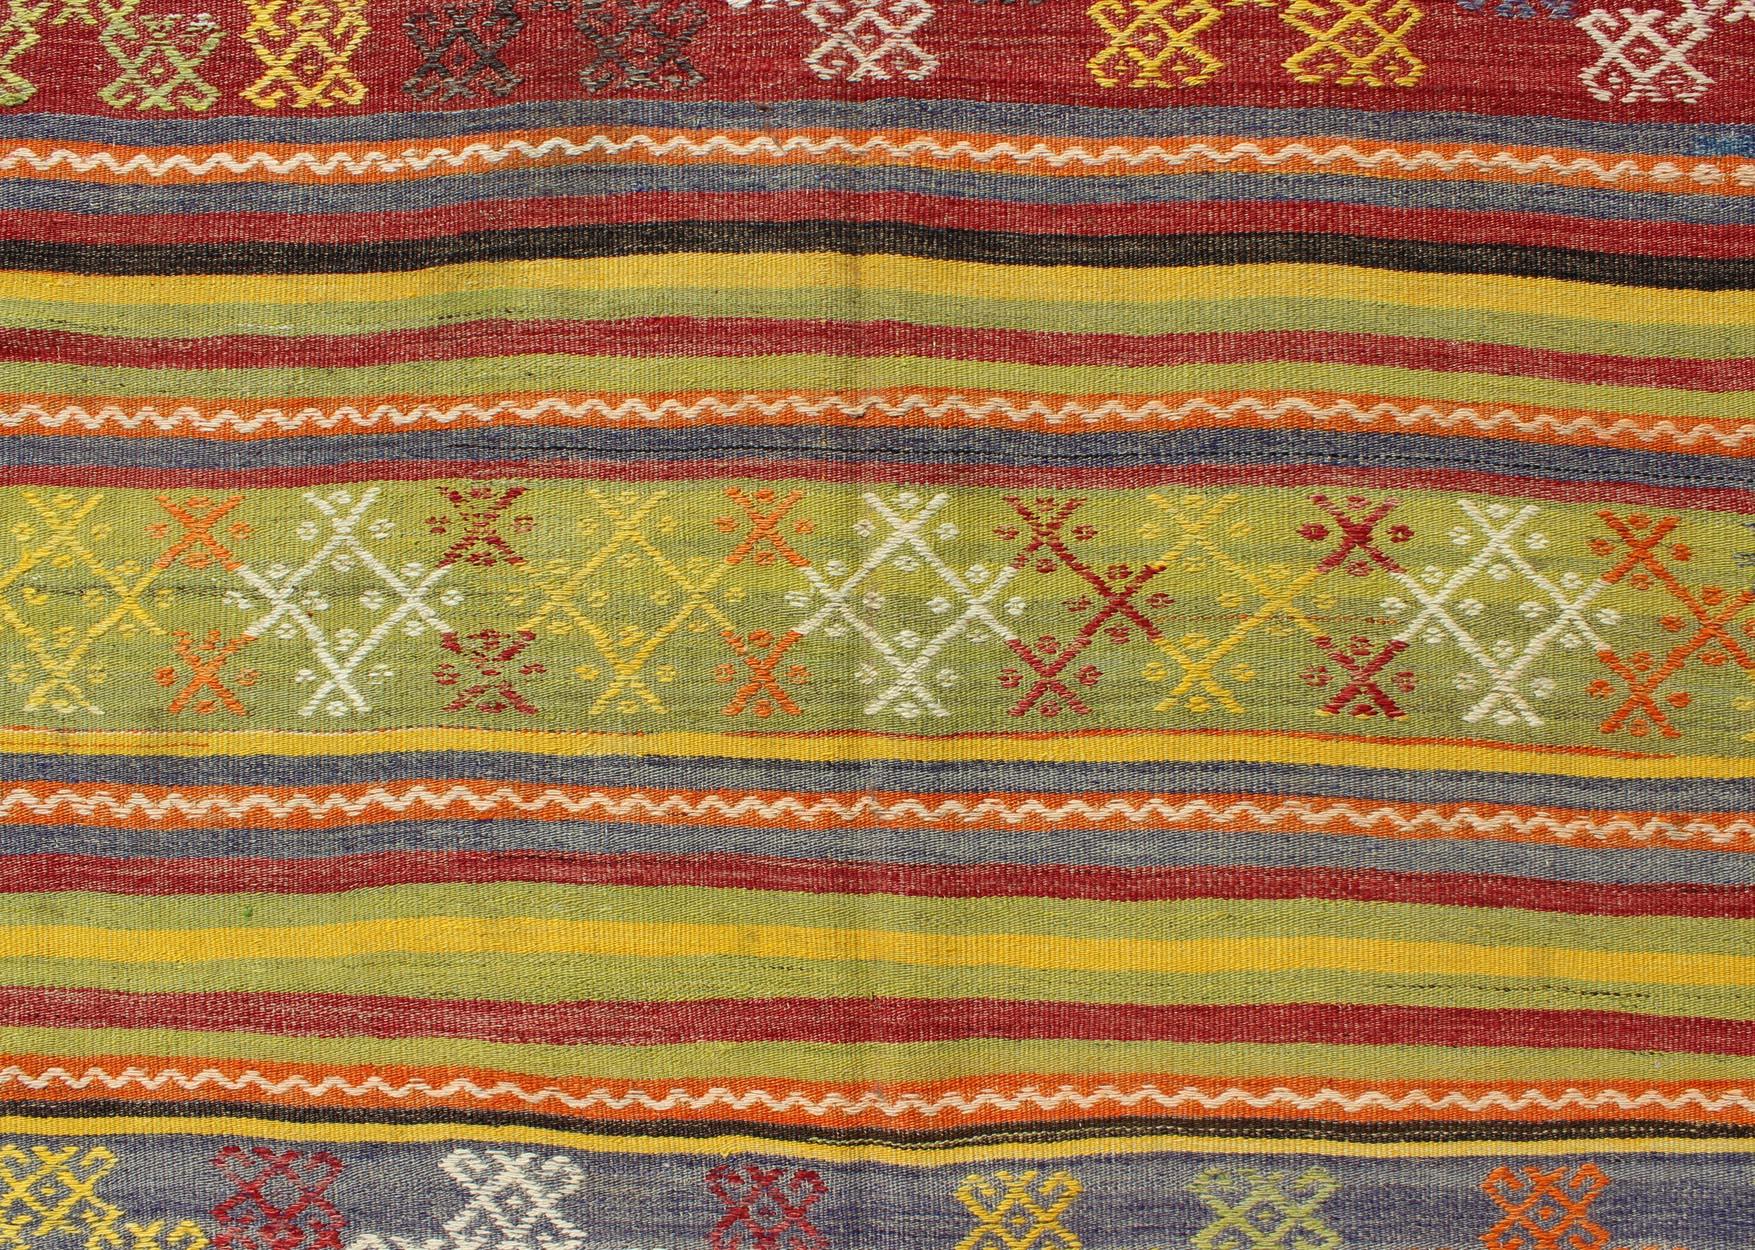 Wool Vintage Turkish Kilim Rug with Geometric Shapes and Colorful Horizontal Stripes For Sale